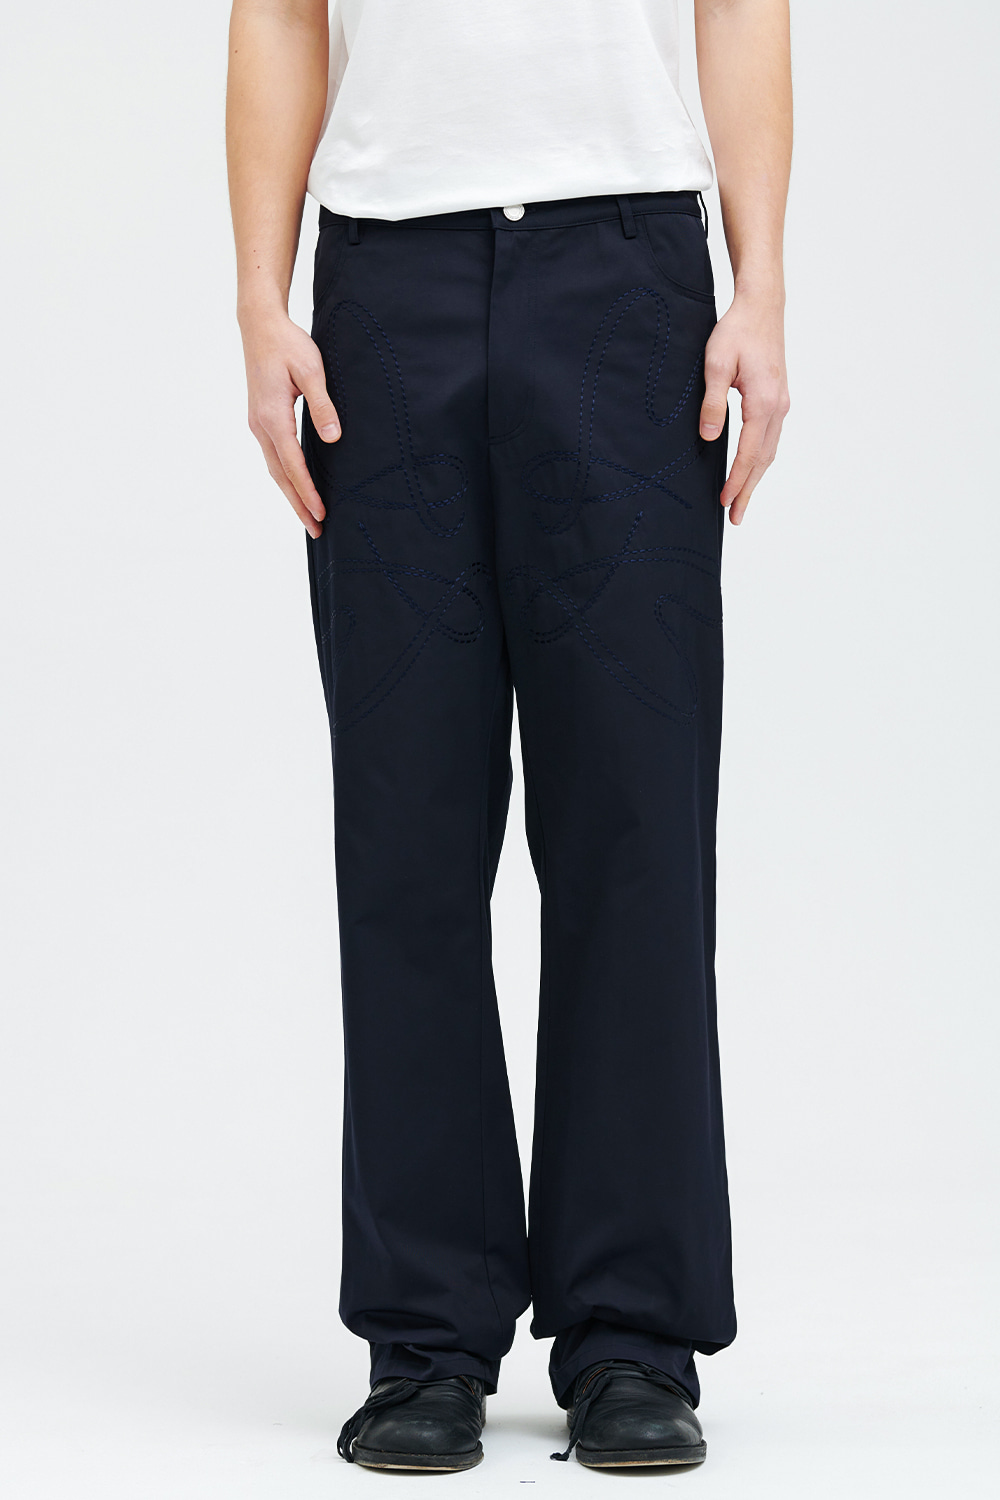 Pansy Lettering Pants-Navy